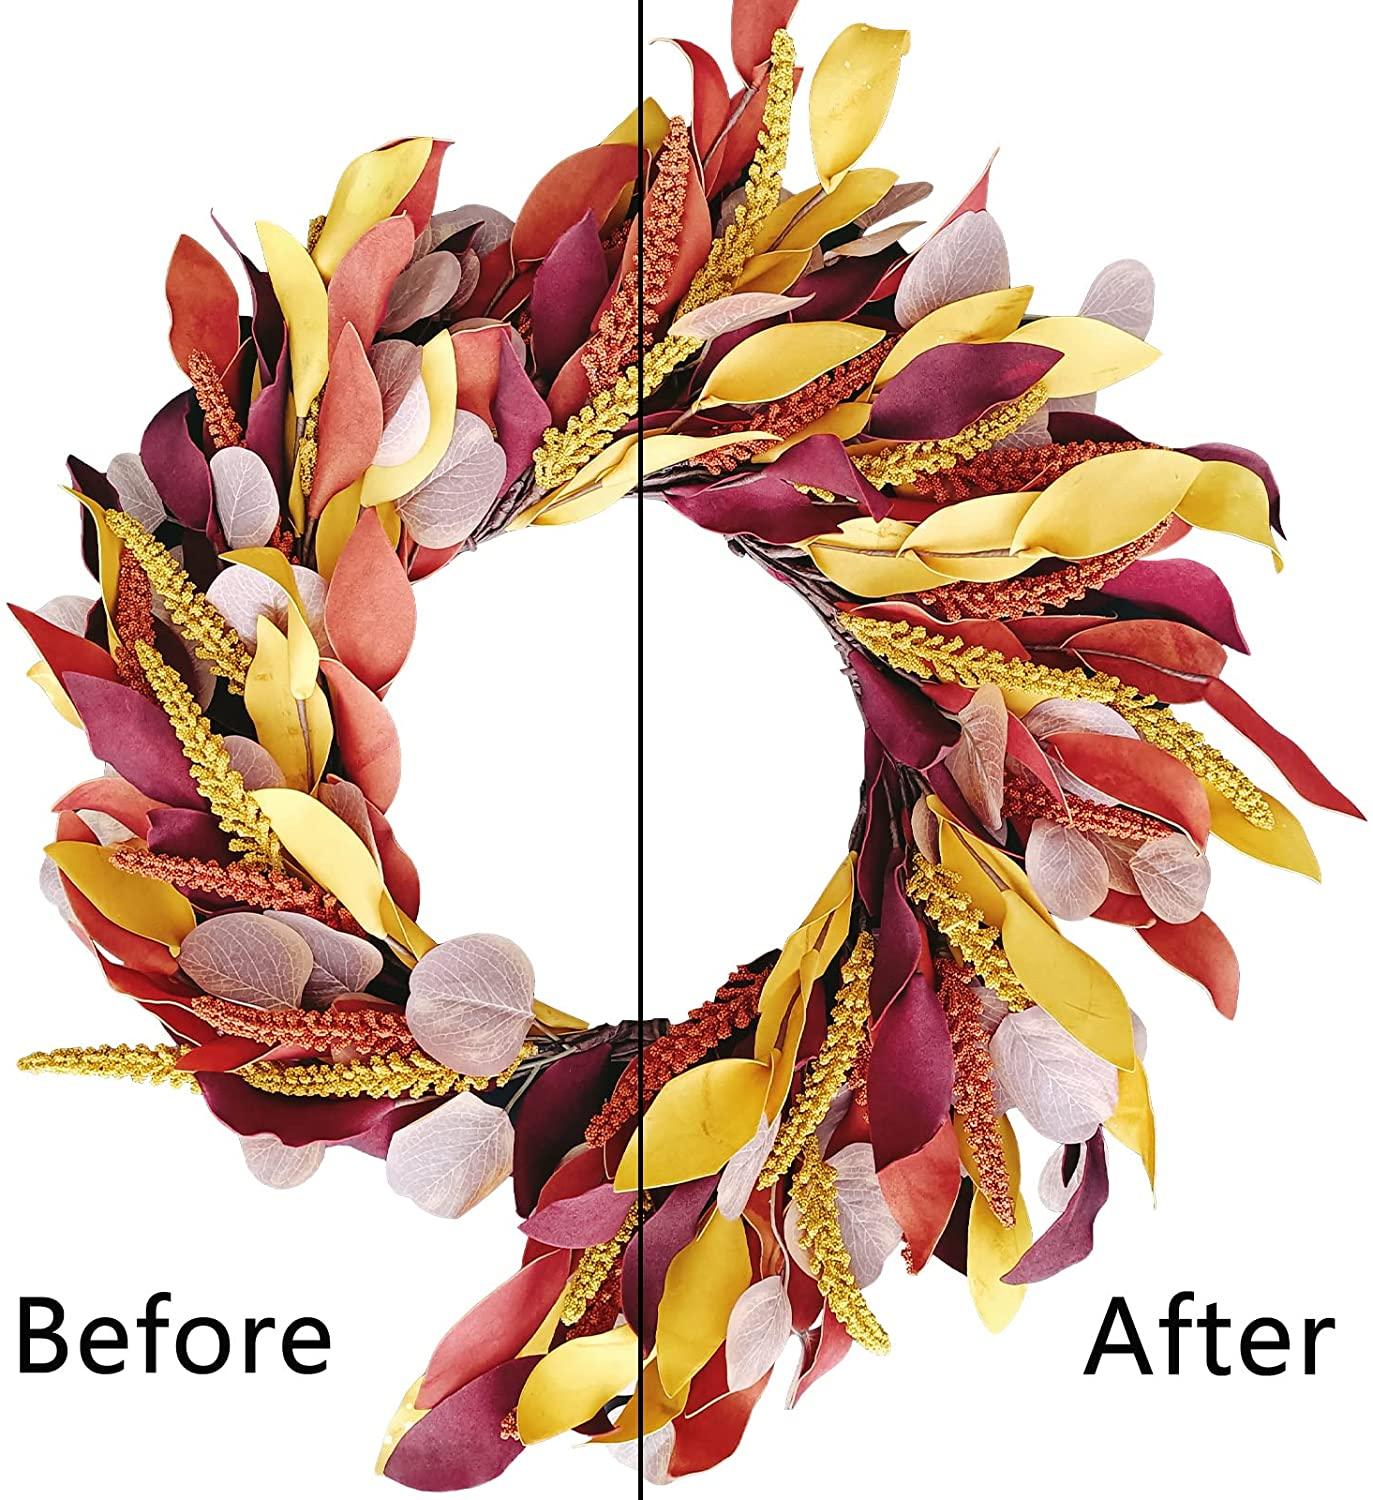 TOKCARE 24 inch Fall Wreath Front Door Wreath Grain Wreath Harvest GolTOKCARE 24 inch Fall Wreath Front Door Wreath Grain Wreath Harvest Gold Wheat Garland Autumn Wreath Fall-Decorations